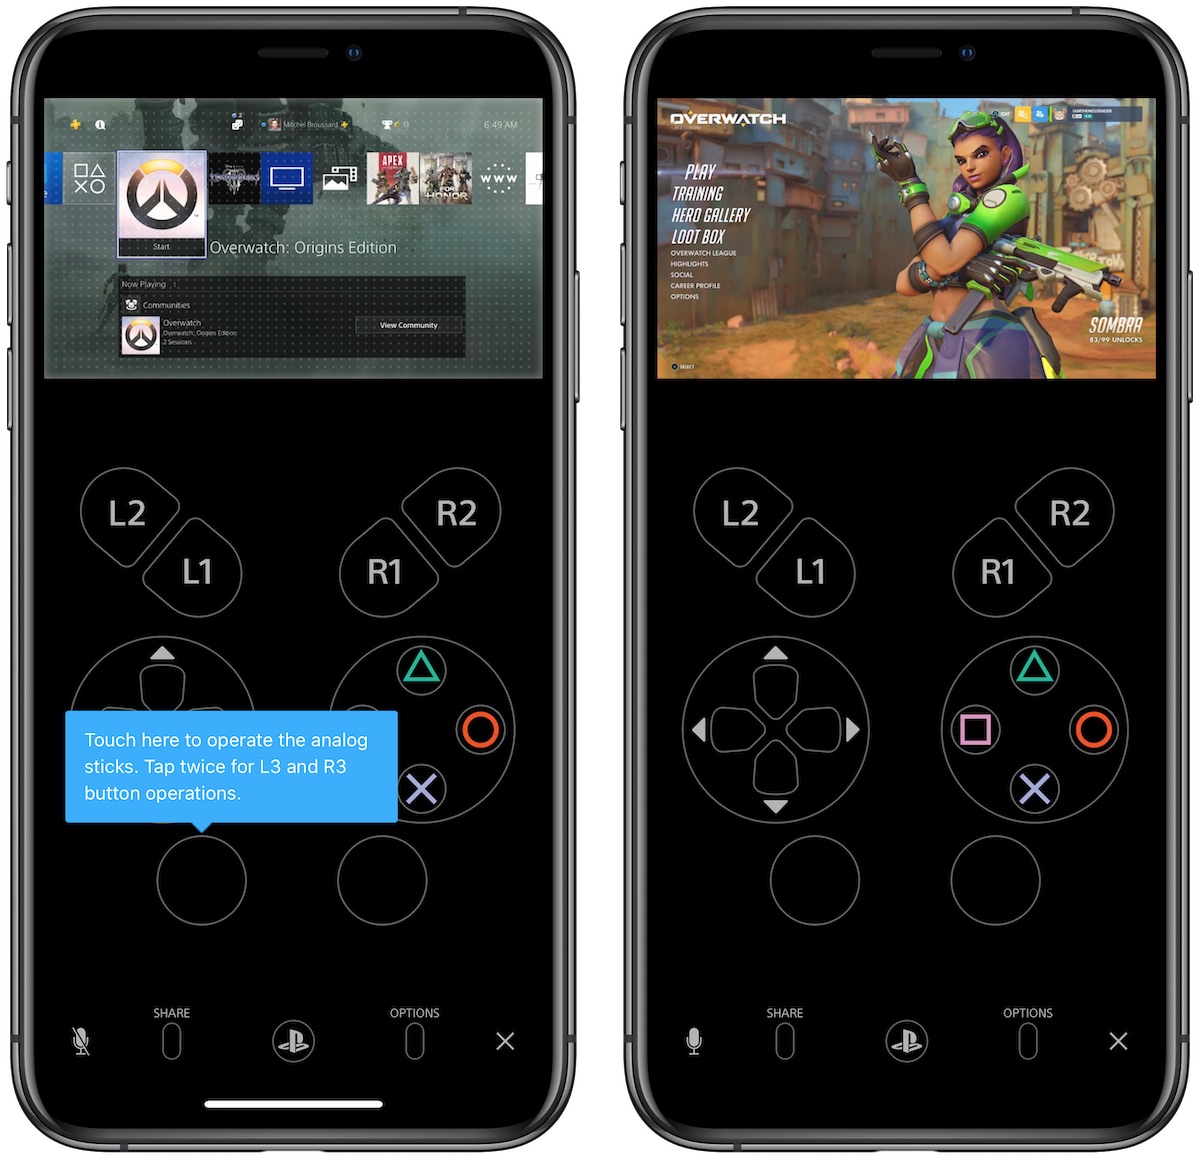 Iphone ps4 remote play